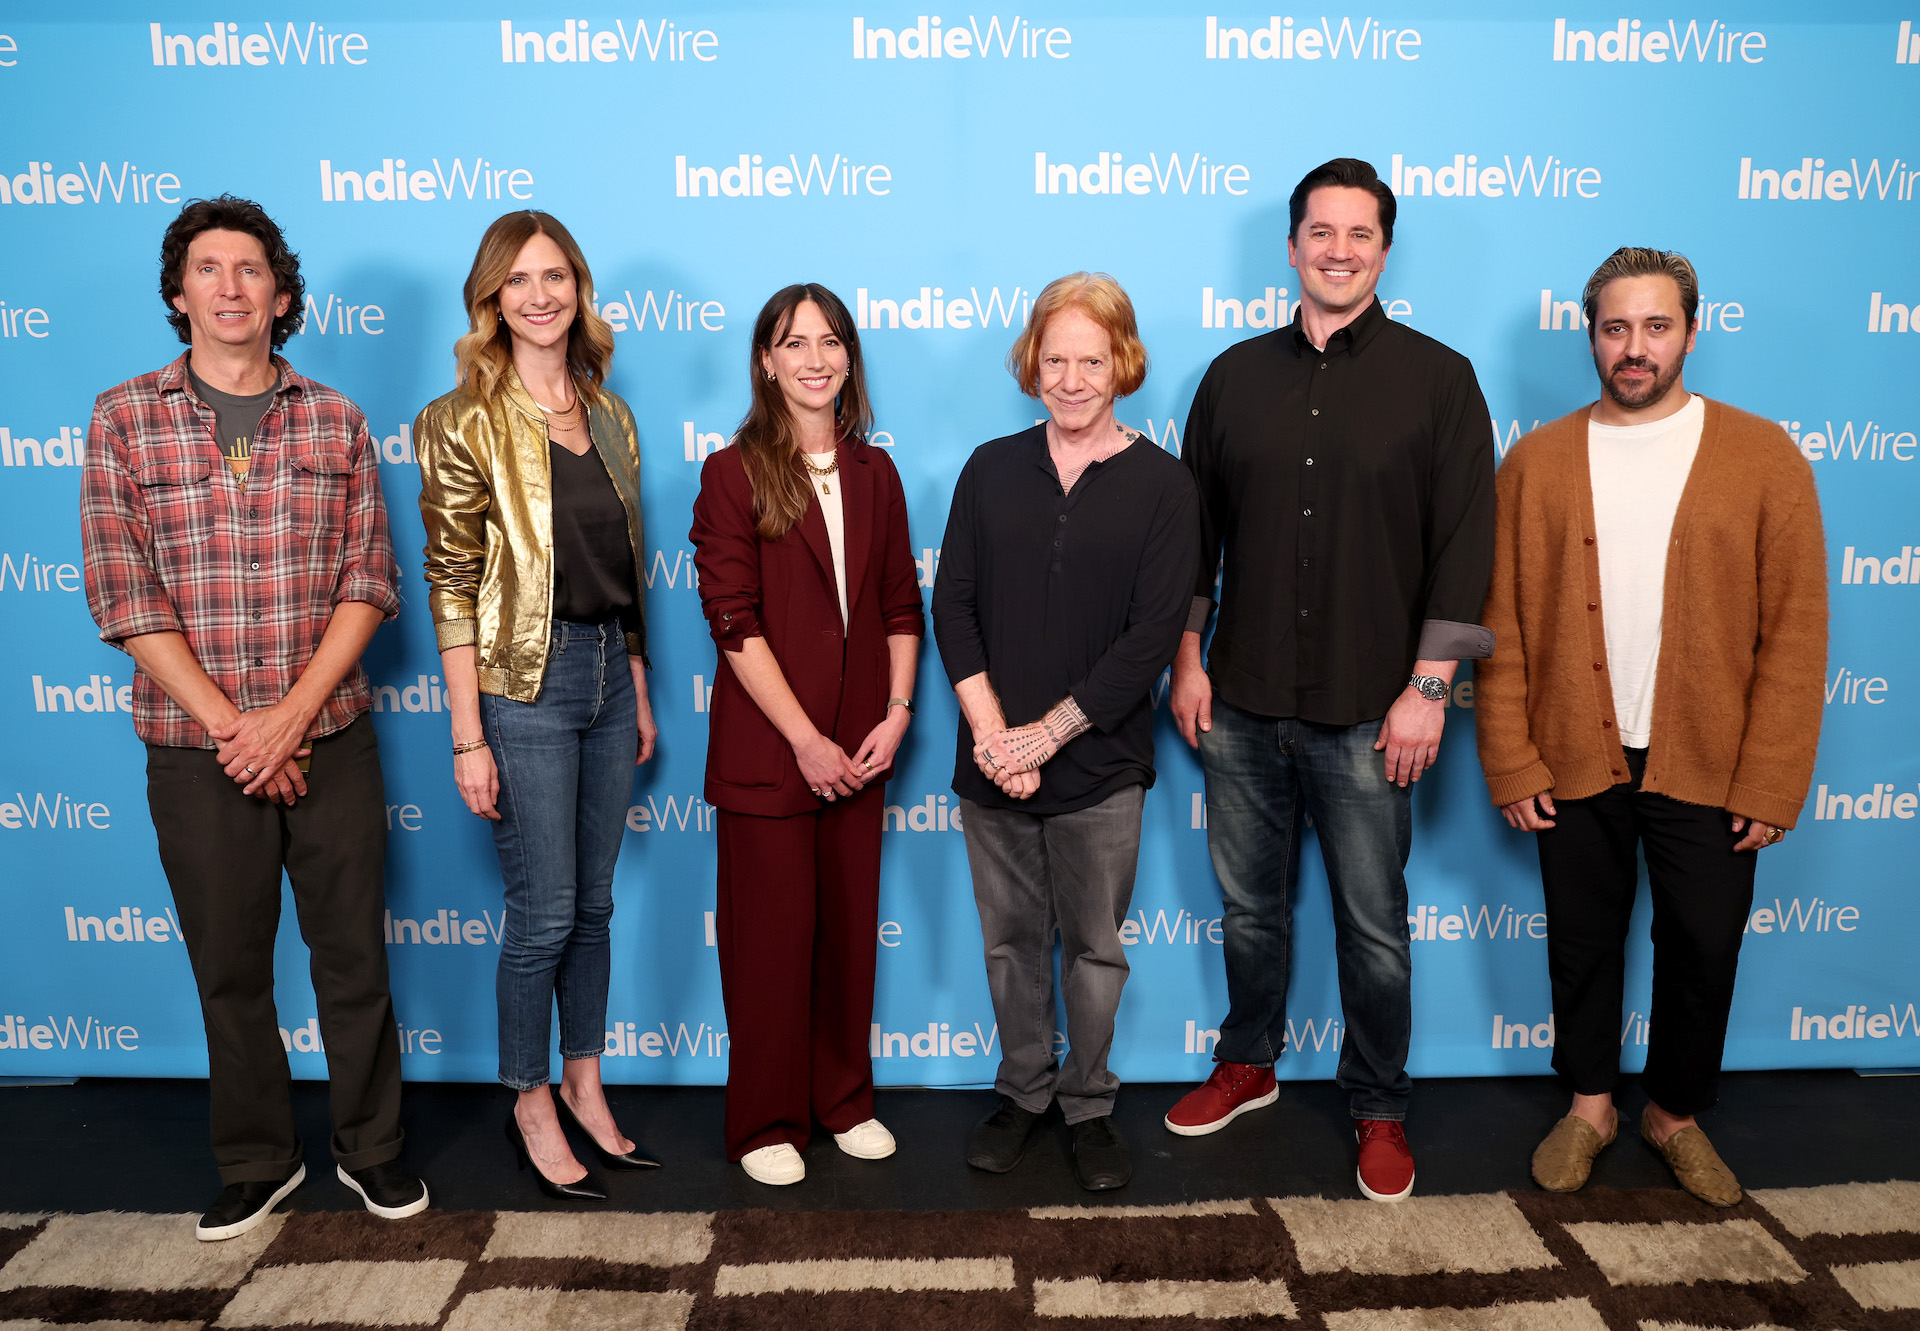 HOLLYWOOD, CALIFORNIA - JUNE 03: (LR) Craig Henighan, Jen Malone, Laura Zempel, Danny Elfman, Chris Bacon and Bobby Krlic attend IndieWire's Consider This Event: Television 2023 at NeueHouse Hollywood on June 03, 2023 in Hollywood, California.  (Photo by Phillip Faraone/IndieWire via Getty Images)